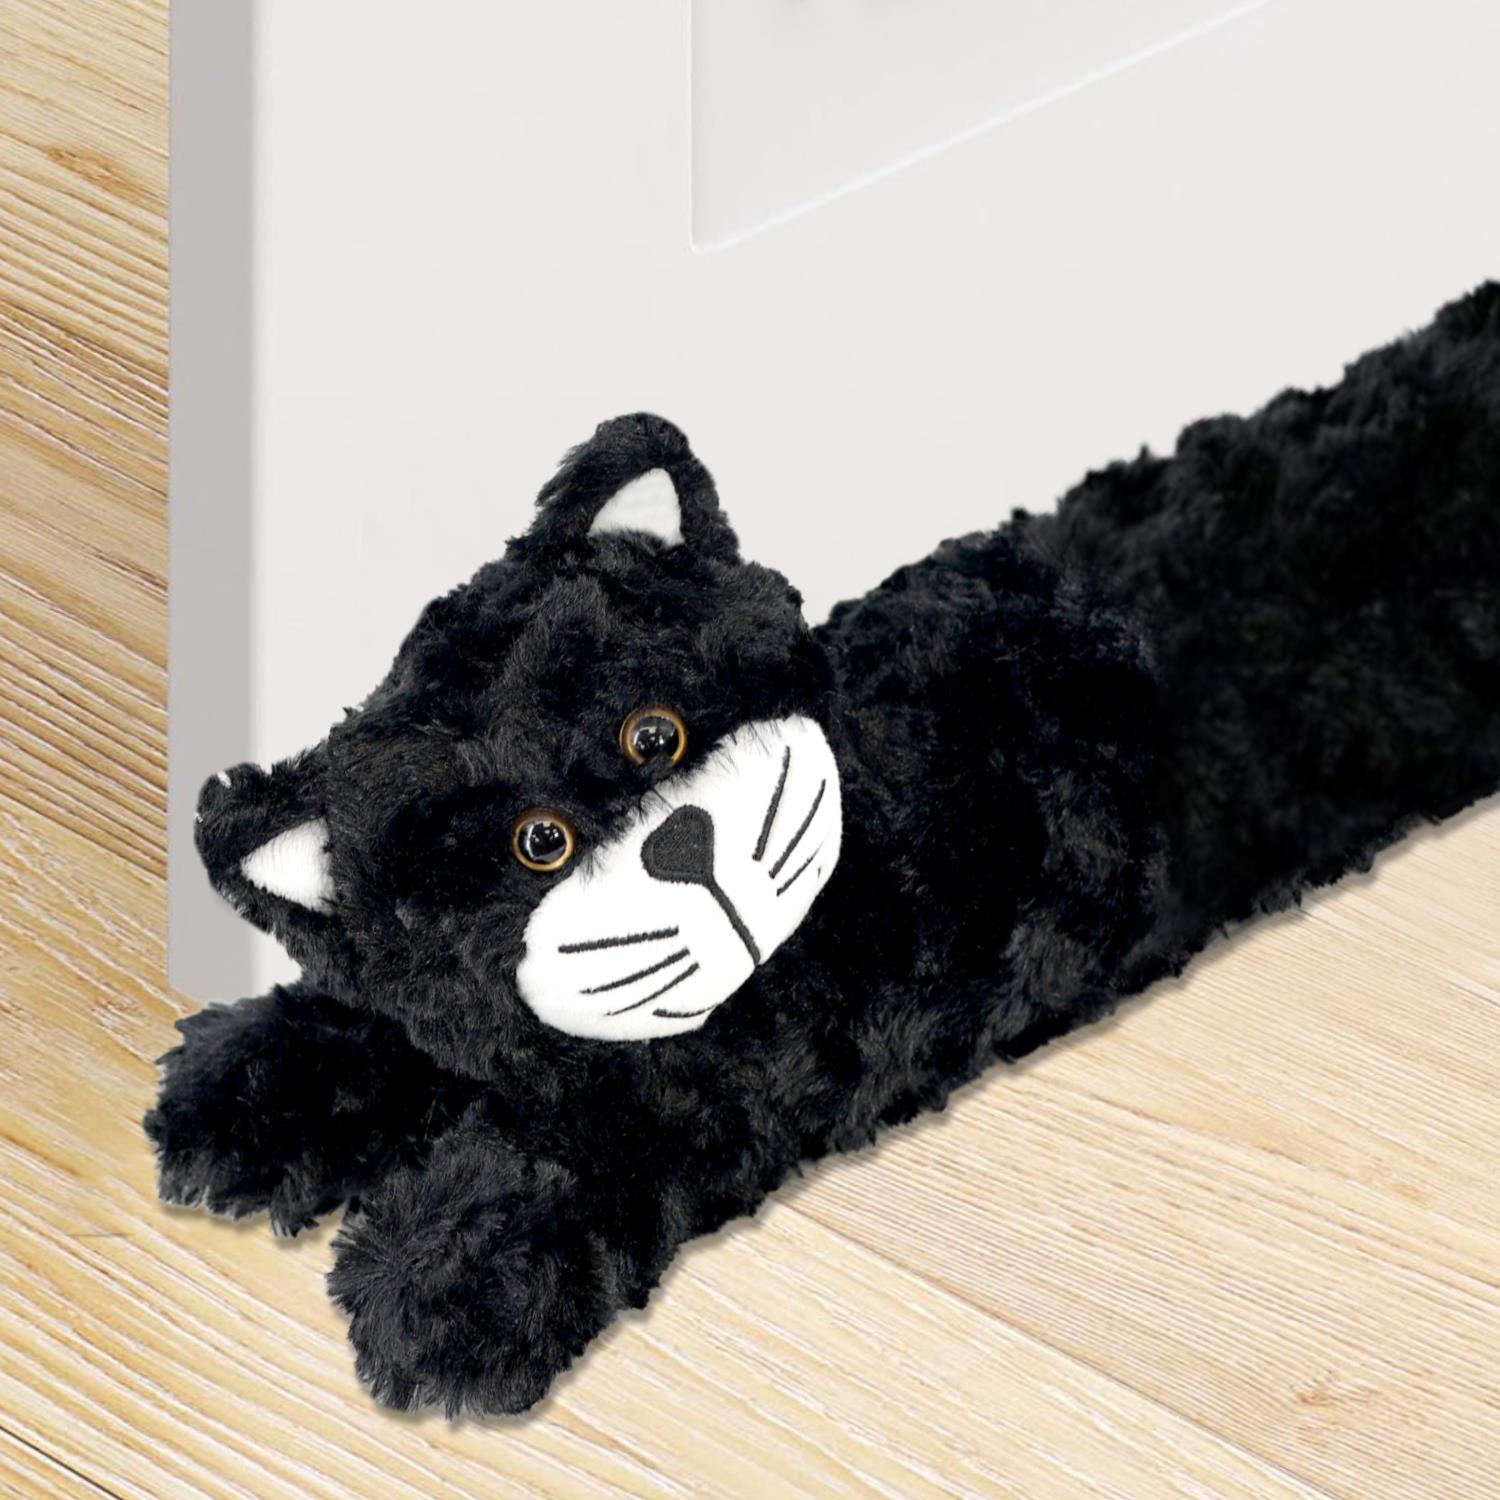 Novelty Black Cat Micro-Fleece Excluder by Geezy - The Magic Toy Shop